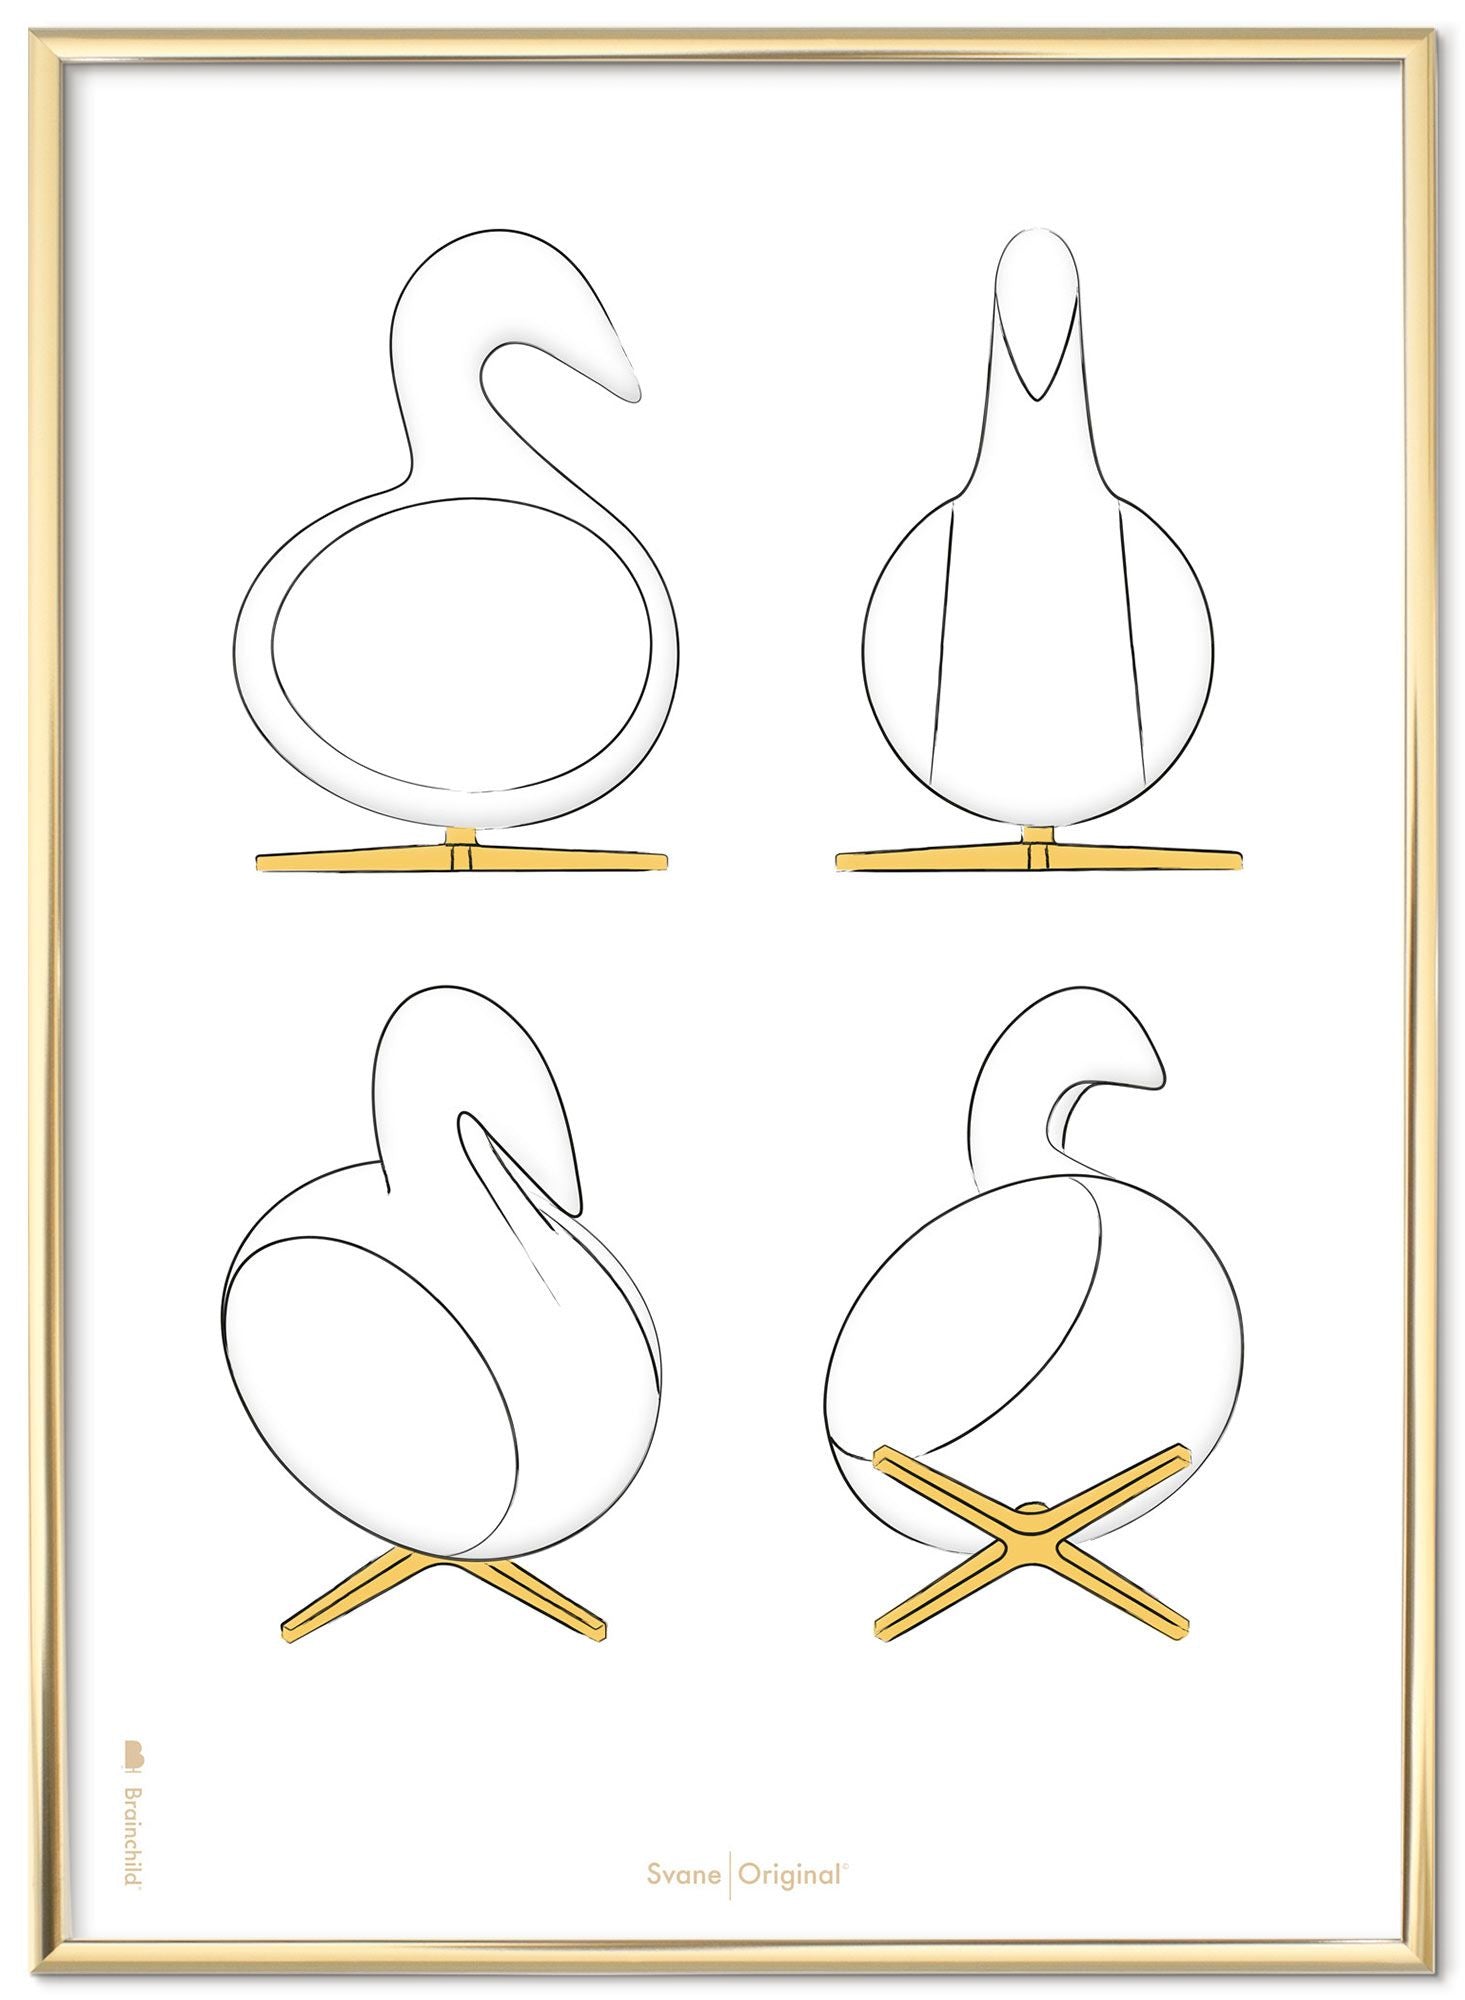 Brainchild Swan Design Sketches Poster Frame Made Of Brass Colored Metal 50x70 Cm, White Background